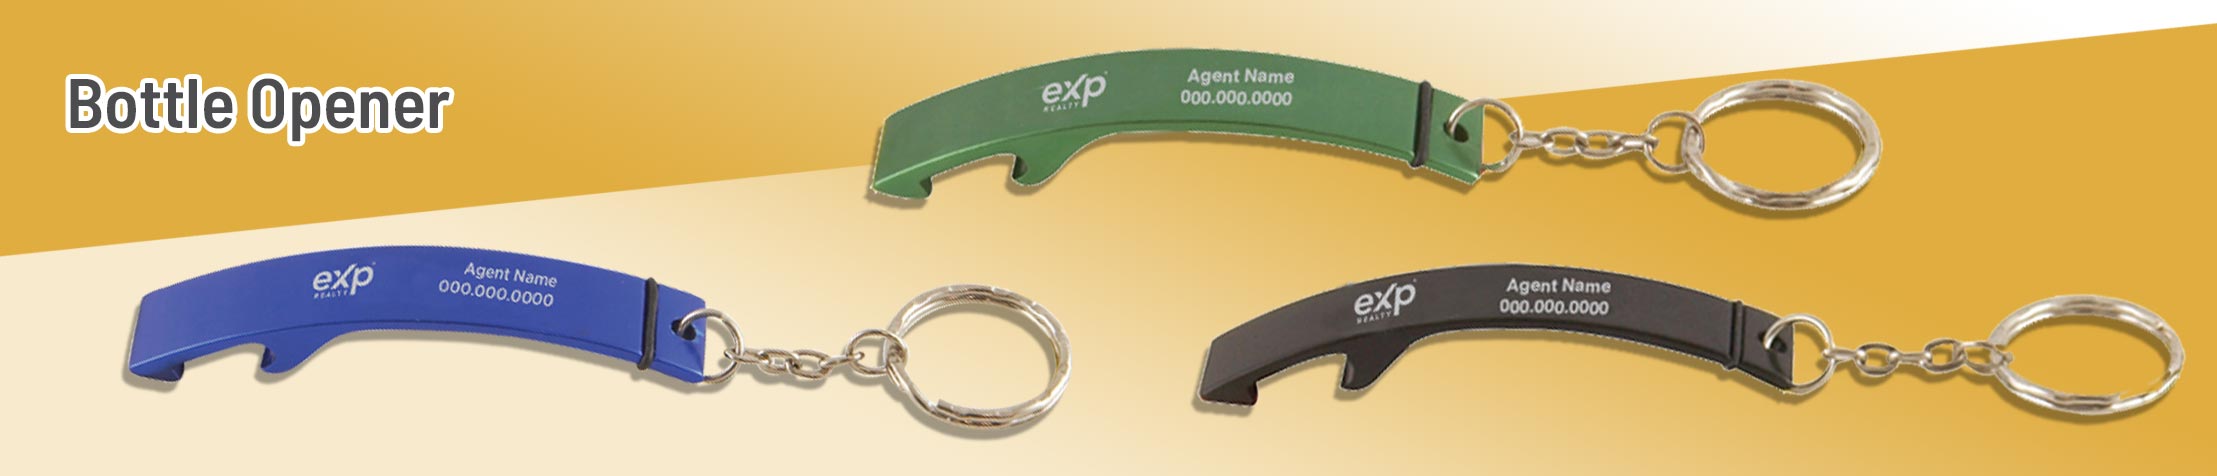 eXp Realty Real Estate Bottle Opener -  personalized realtor promotional products | Sparkprint.com